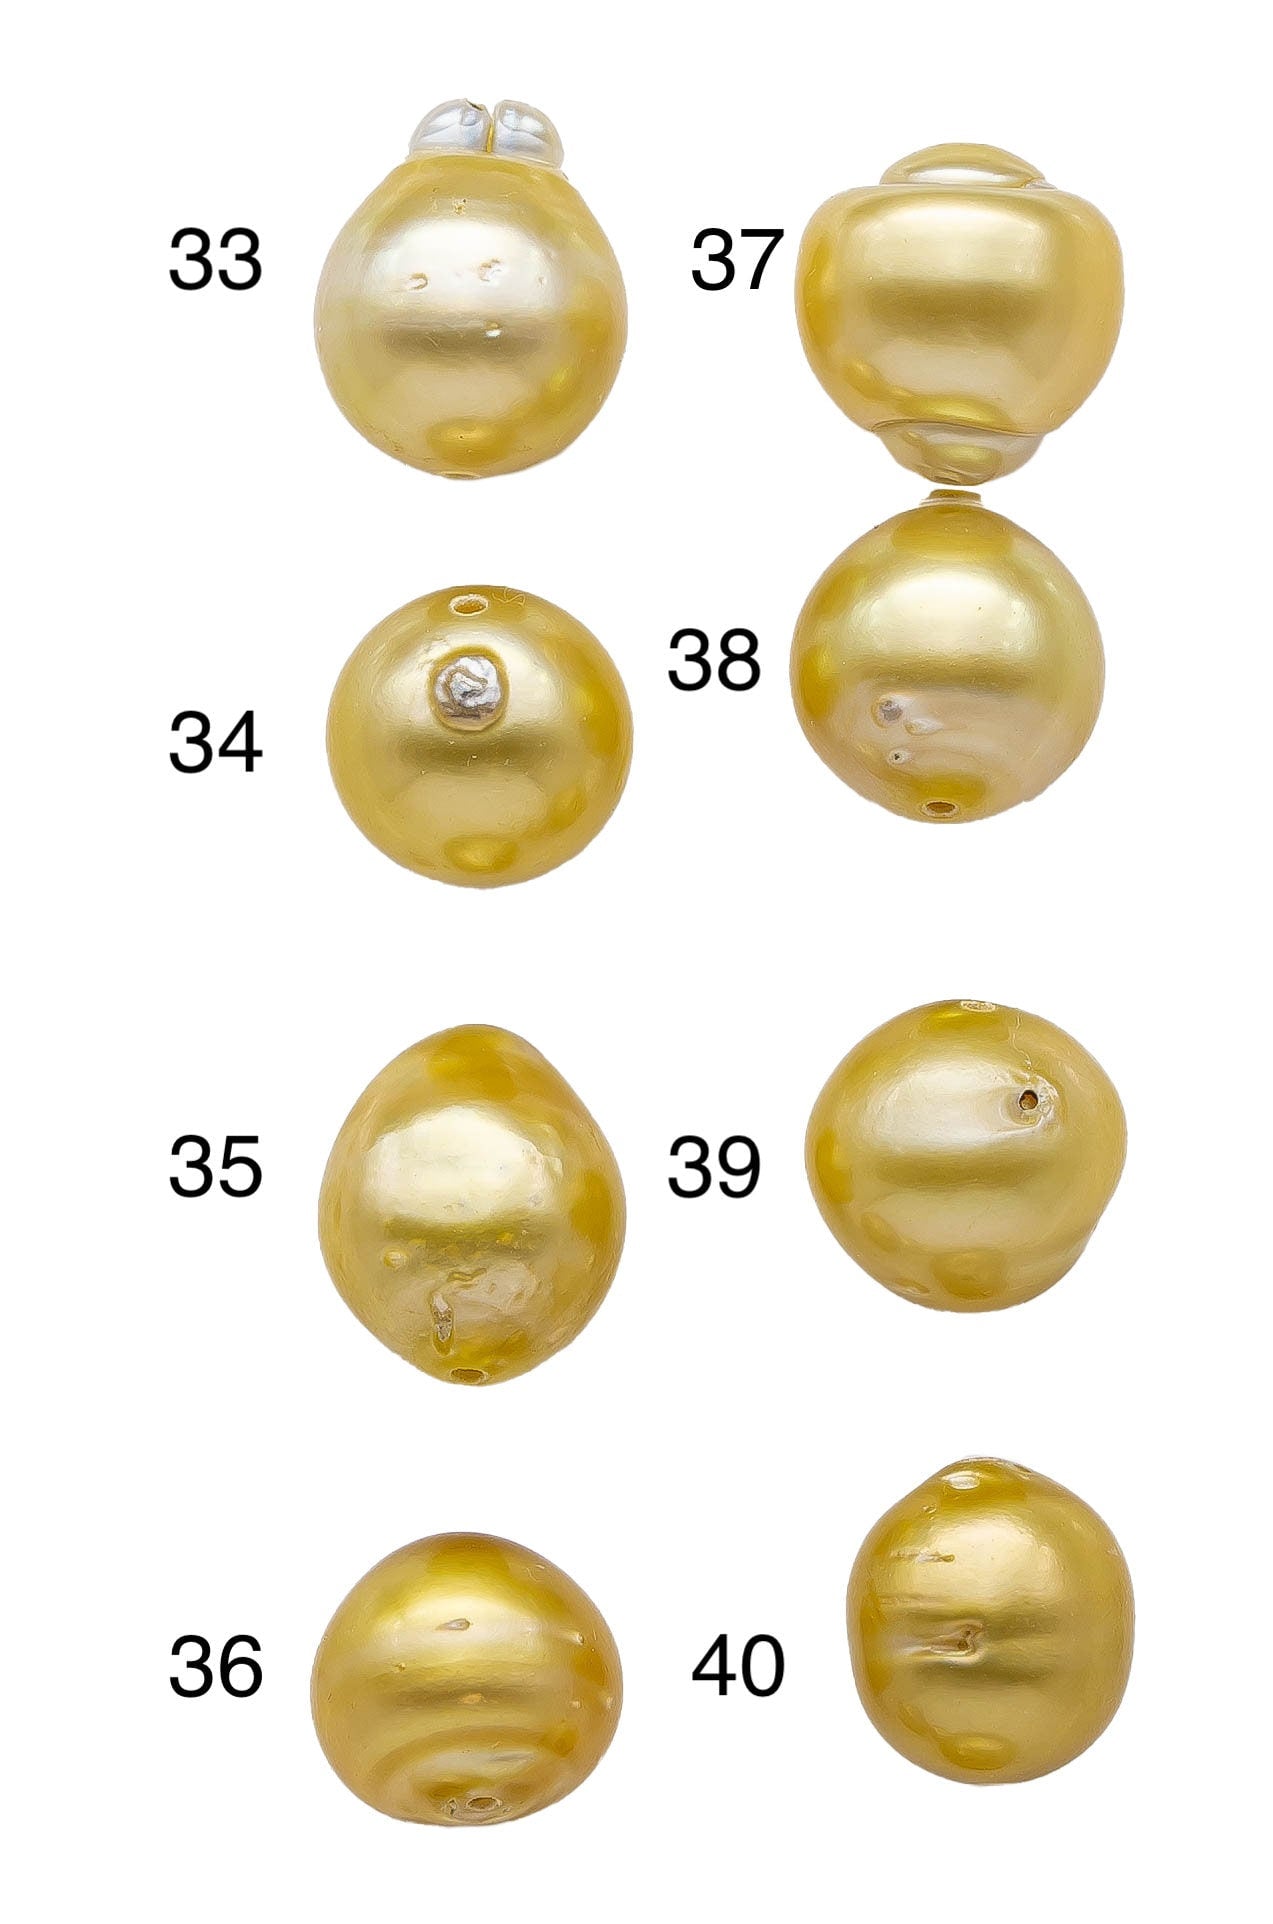 Single Golden Southsea Pearl Drops 1mm Full Drilled for Jewelry Making, Natural Gold Color Saltwater Pearl Size from 10-16mm, SKU#1108GS